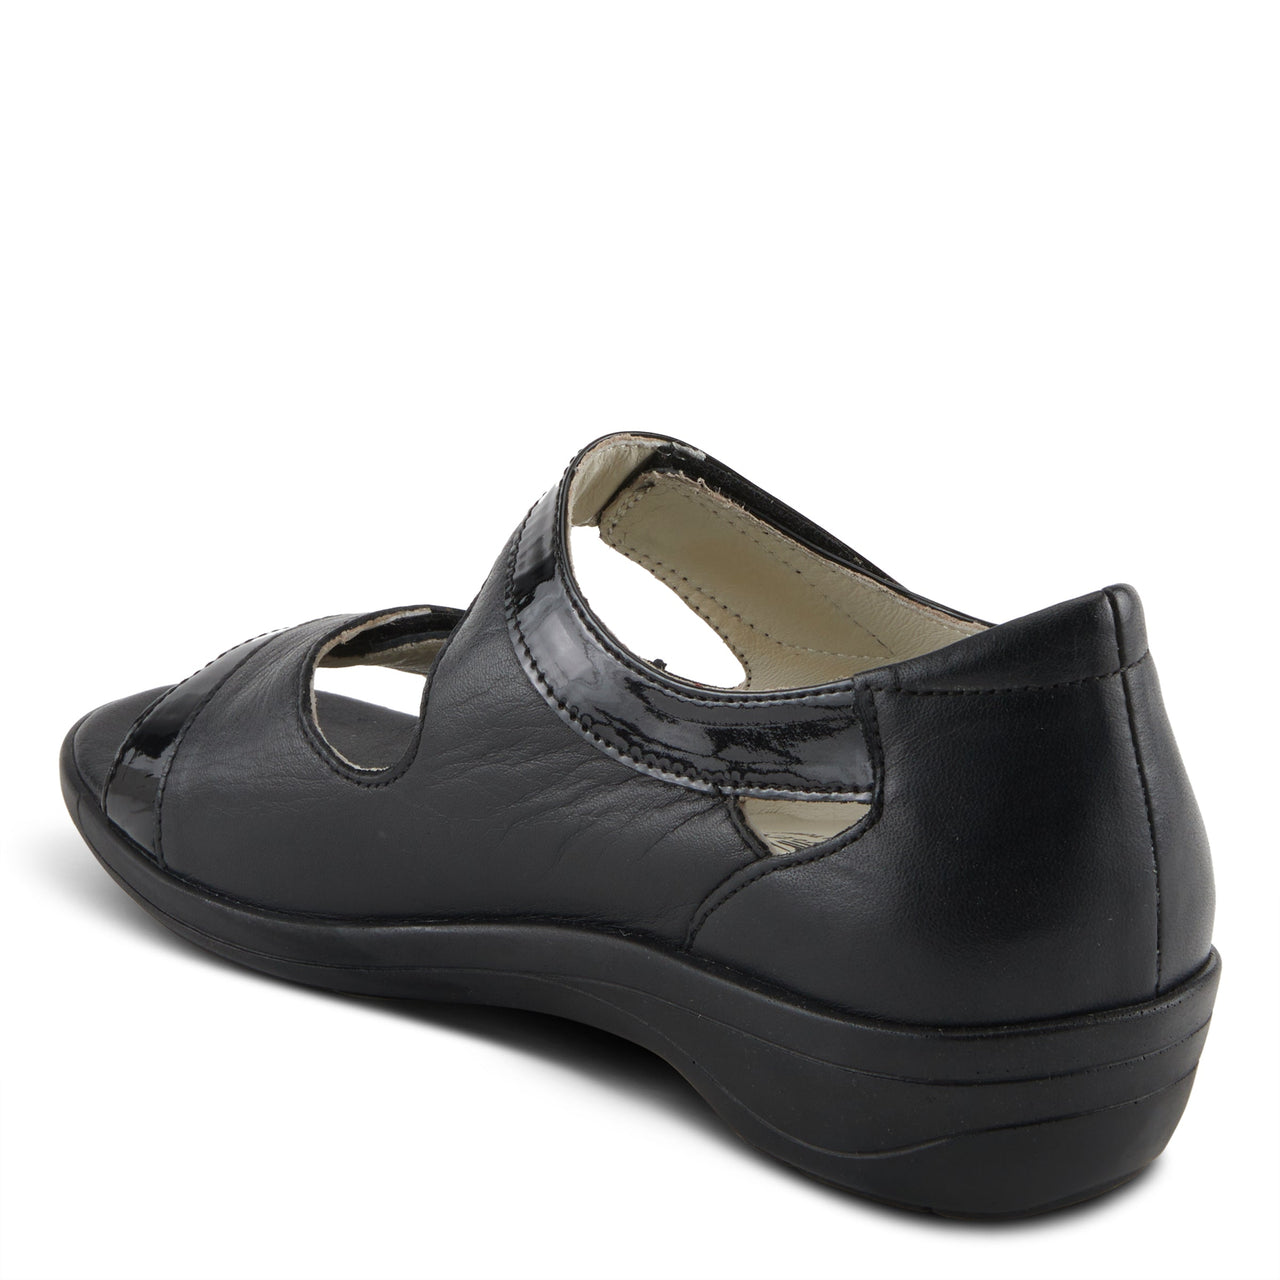 Versatile and fashionable women's sandals in classic black color